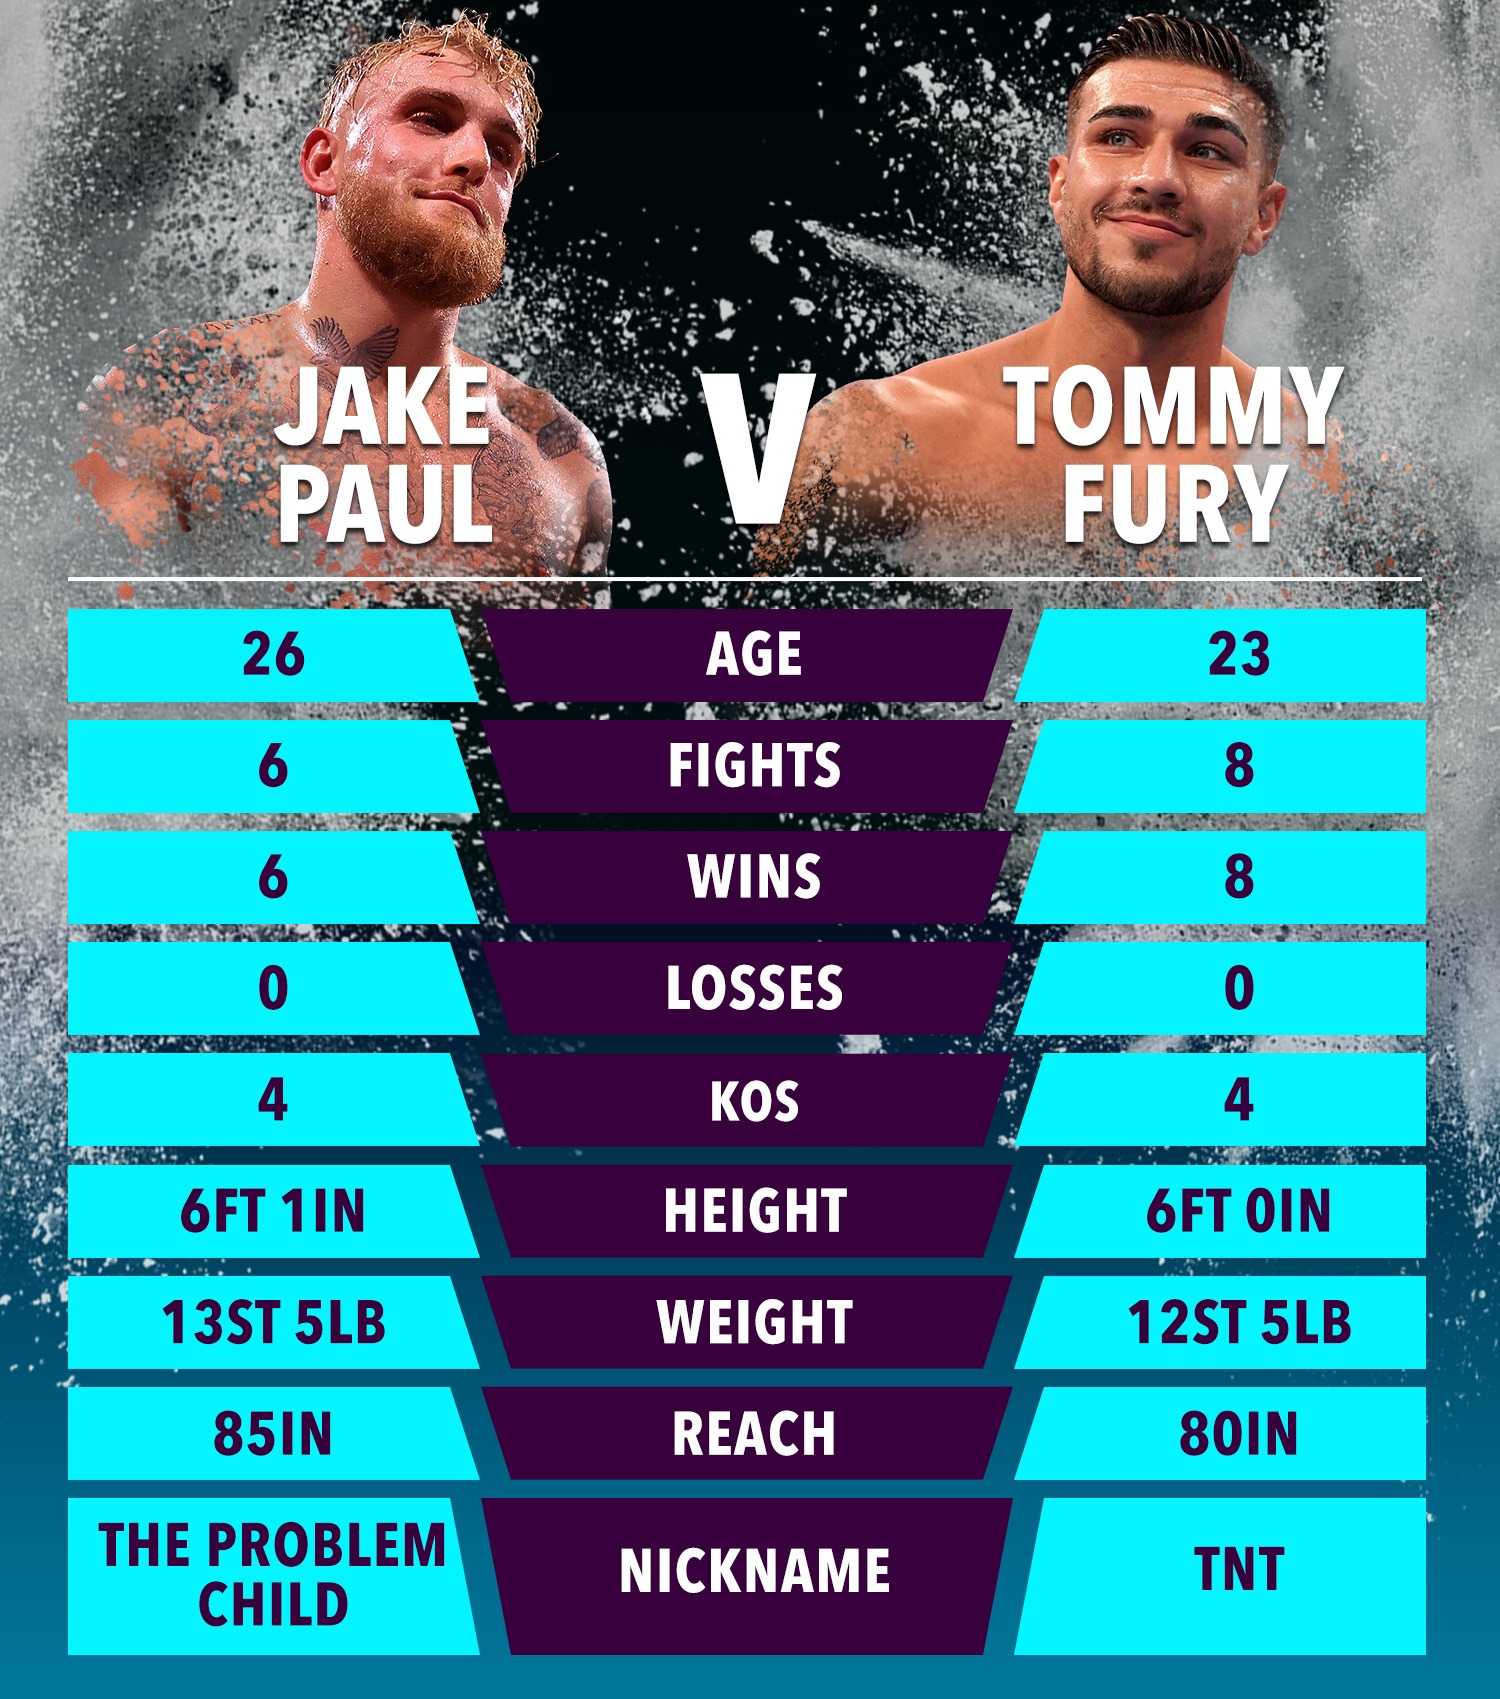 , I feel sorry for lost puppy Tommy Fury, he’s trying to figure out life and treated like runt of family, says Jake Paul